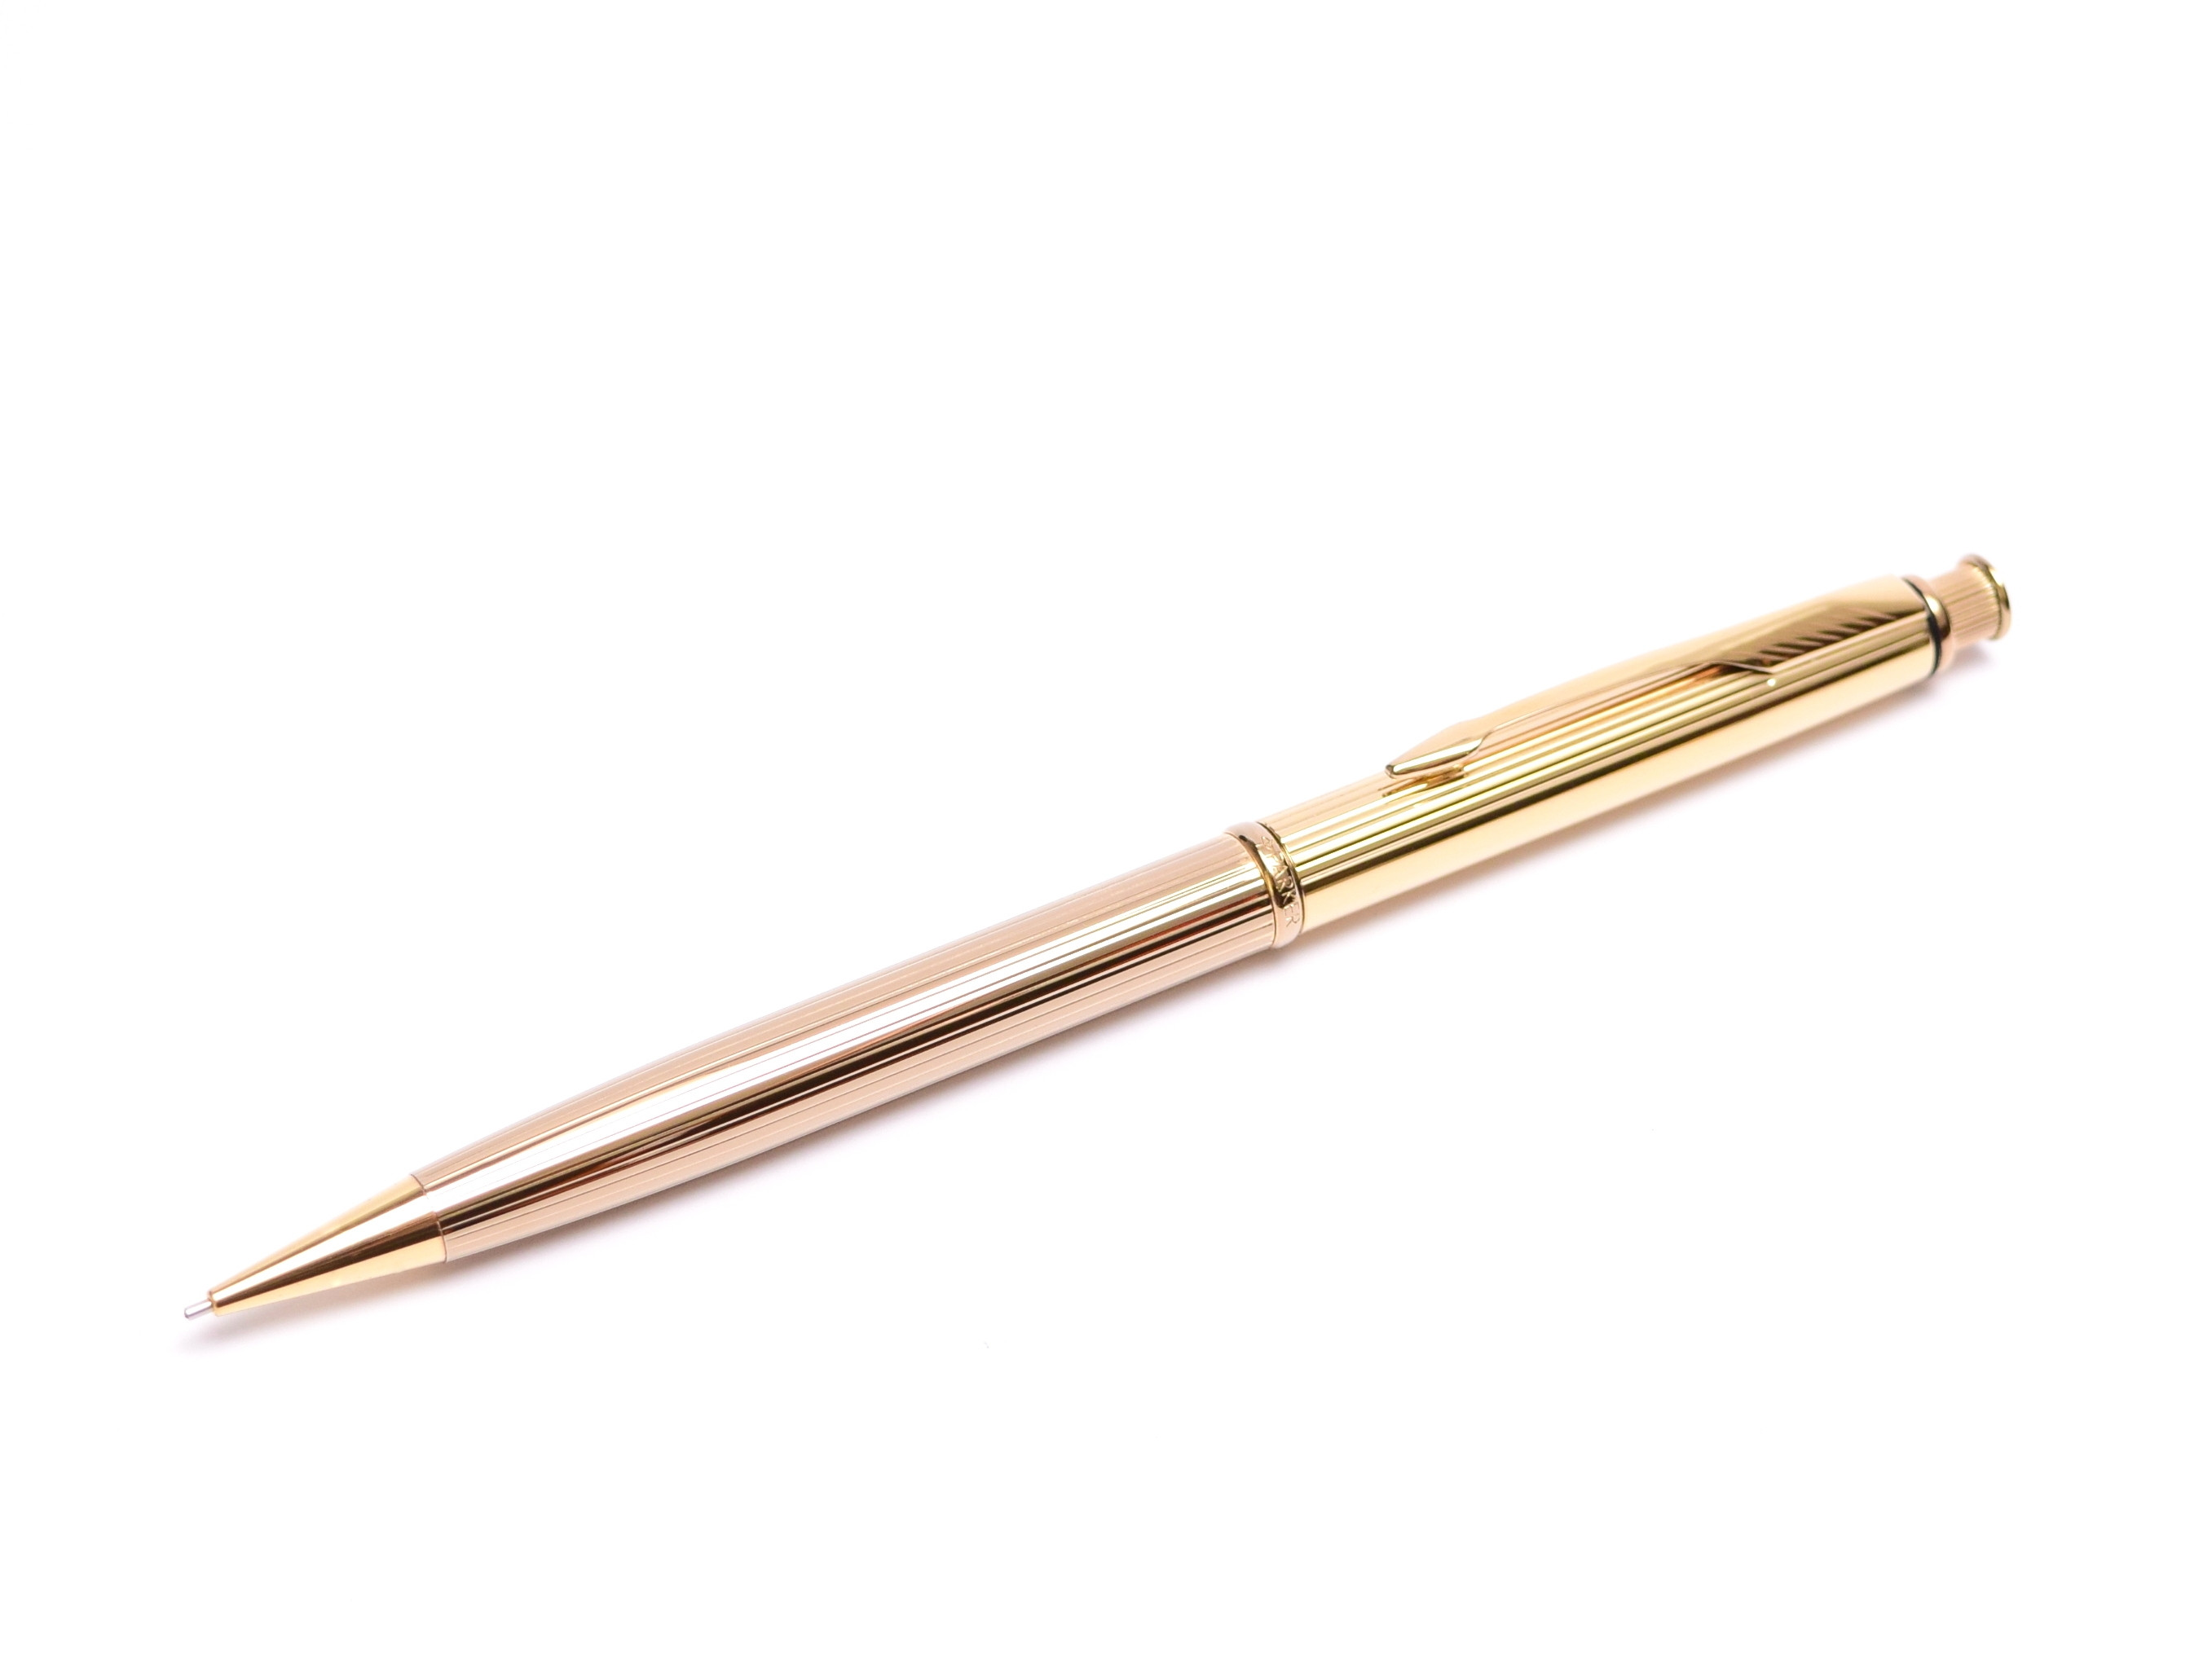 1993 Parker Insignia Flighter DeLuxe Mechanical Pencil with Gold Trim Vintage 